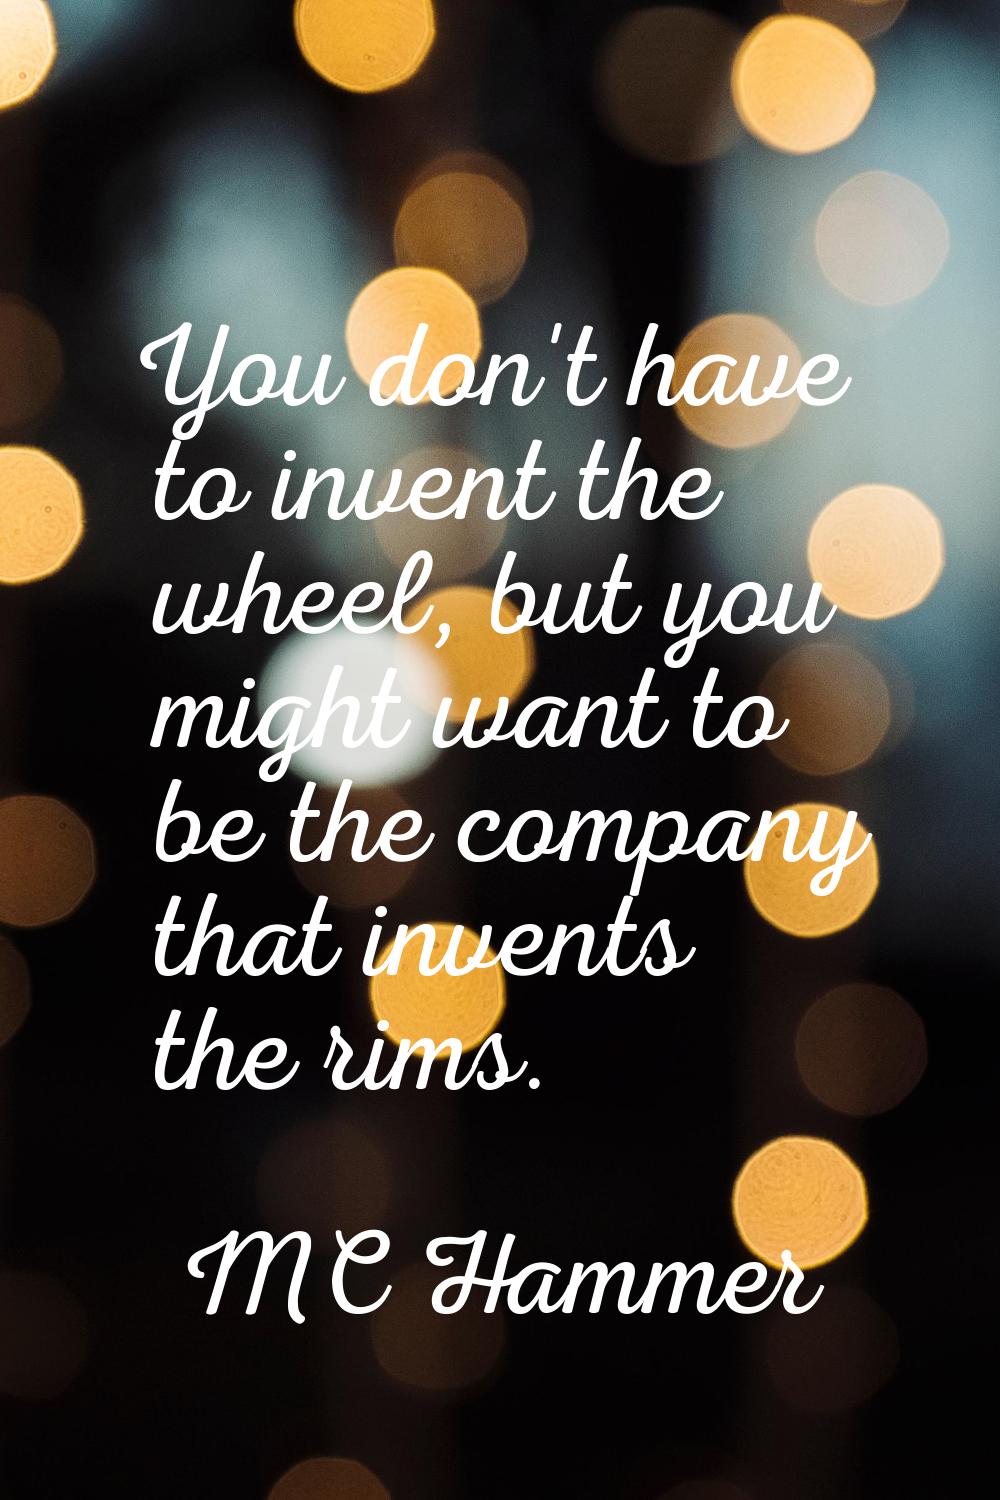 You don't have to invent the wheel, but you might want to be the company that invents the rims.